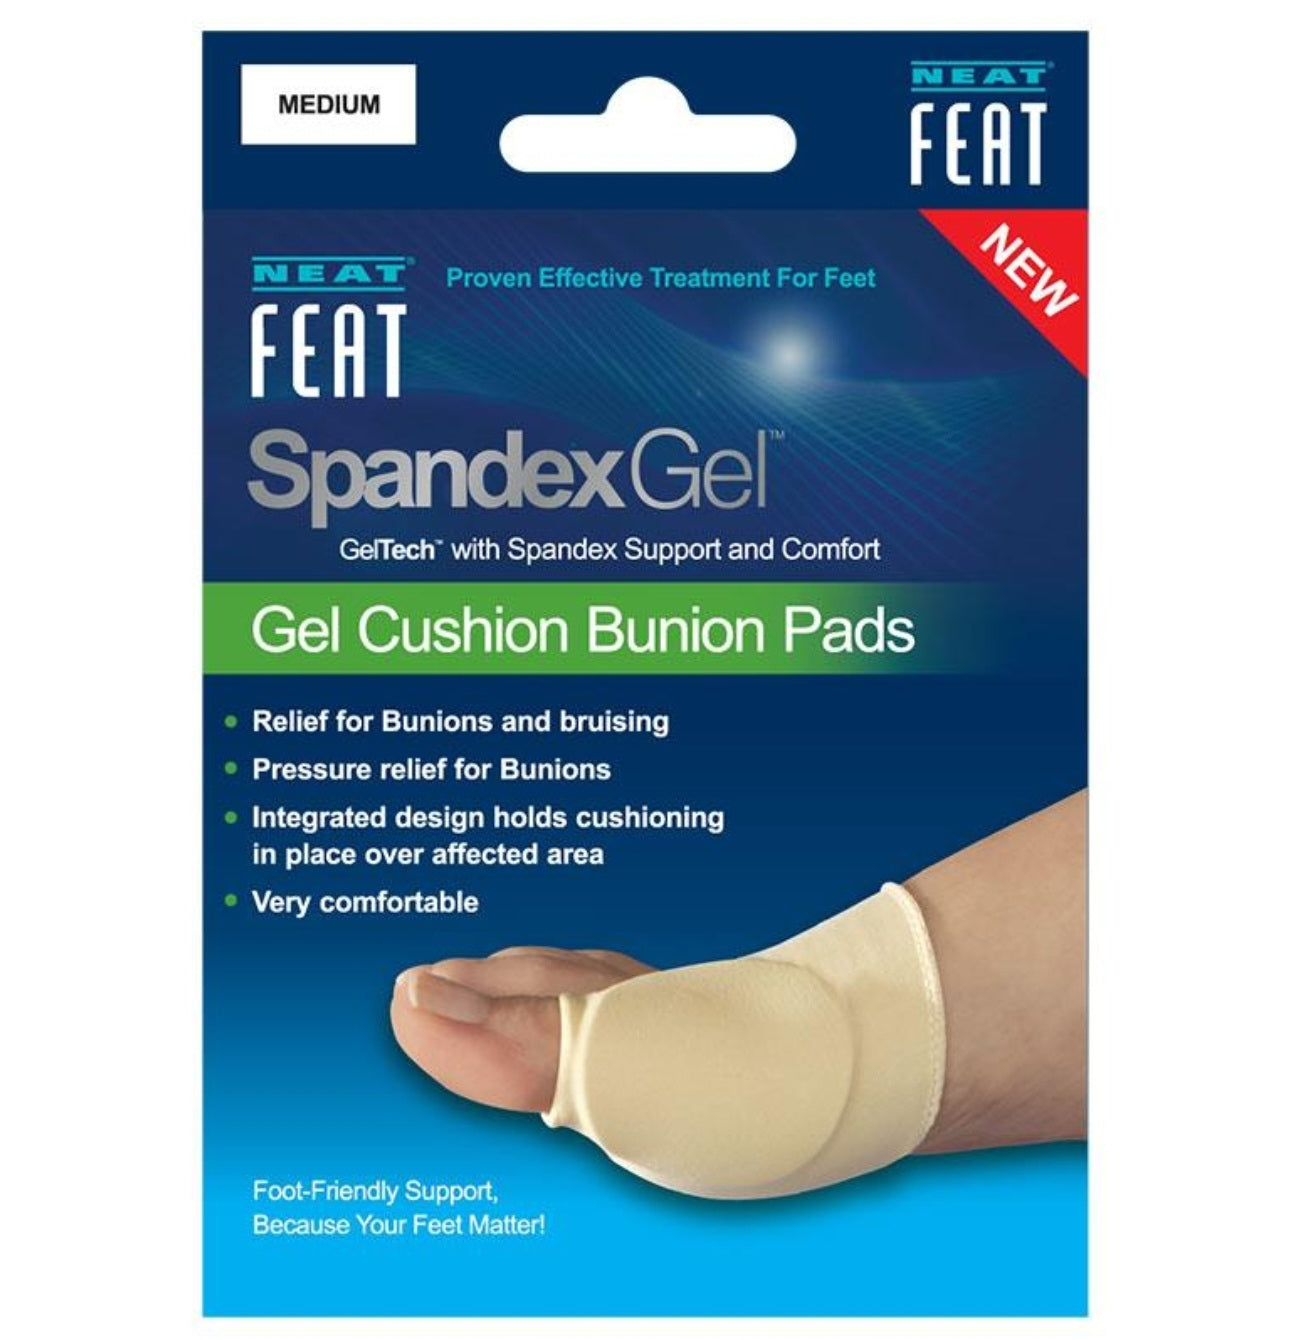 Neat Feat Spandex Gel Cushion Bunion Pads - Med